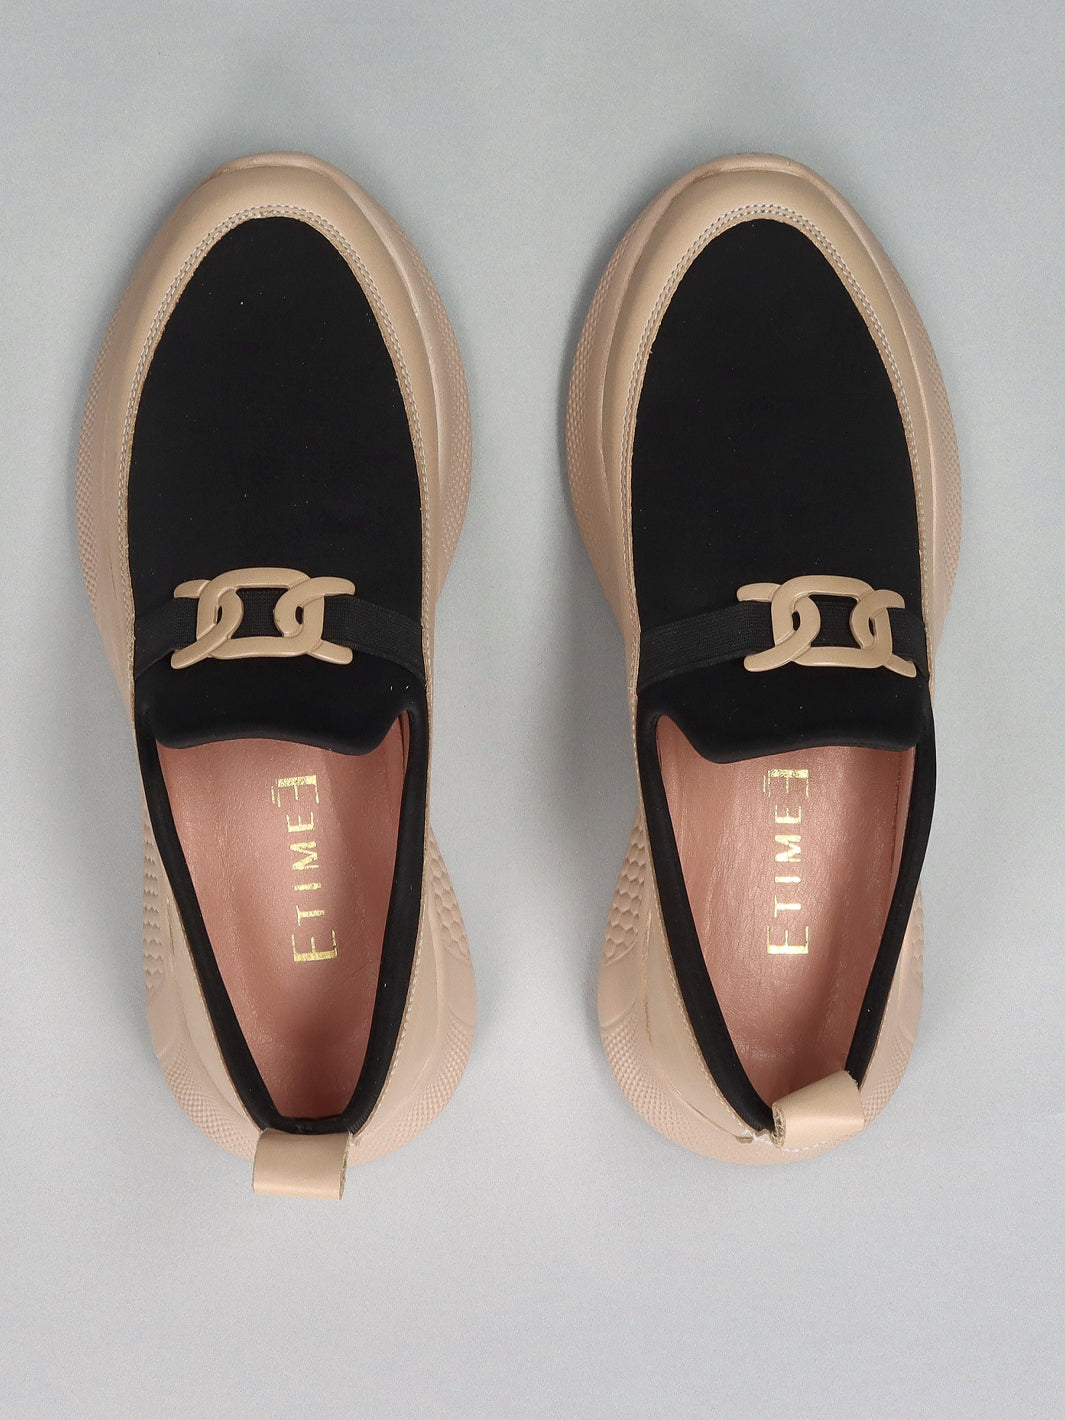 LEATHER LOW SHOES - BEIGE/BLACK